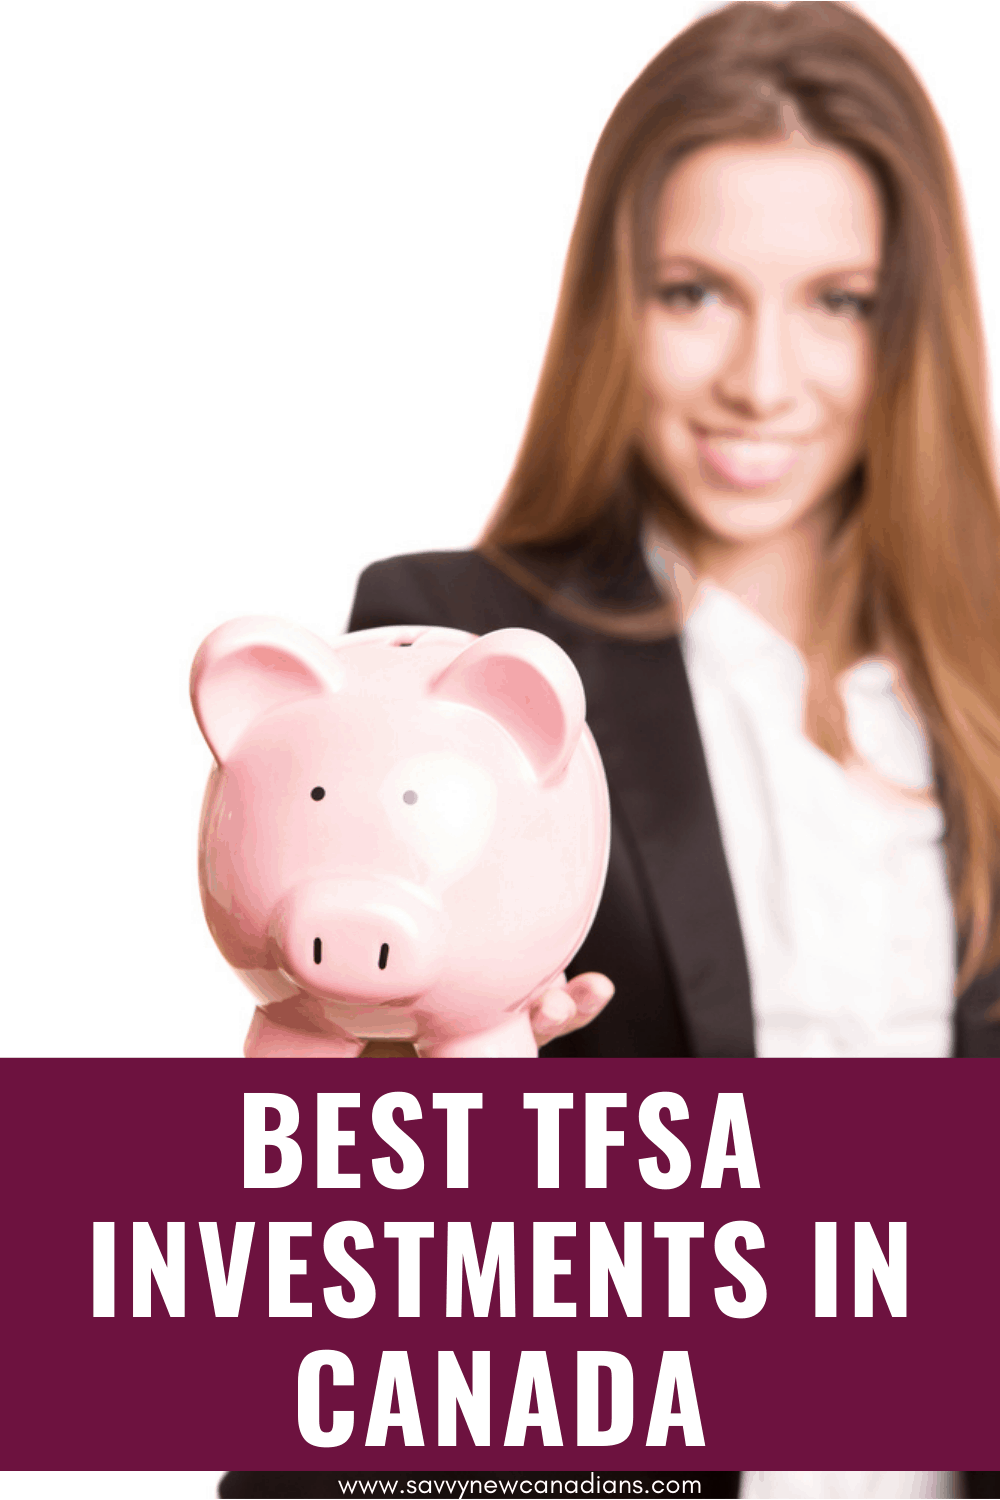 5 Ways to Invest In Your TFSA Account in 2022